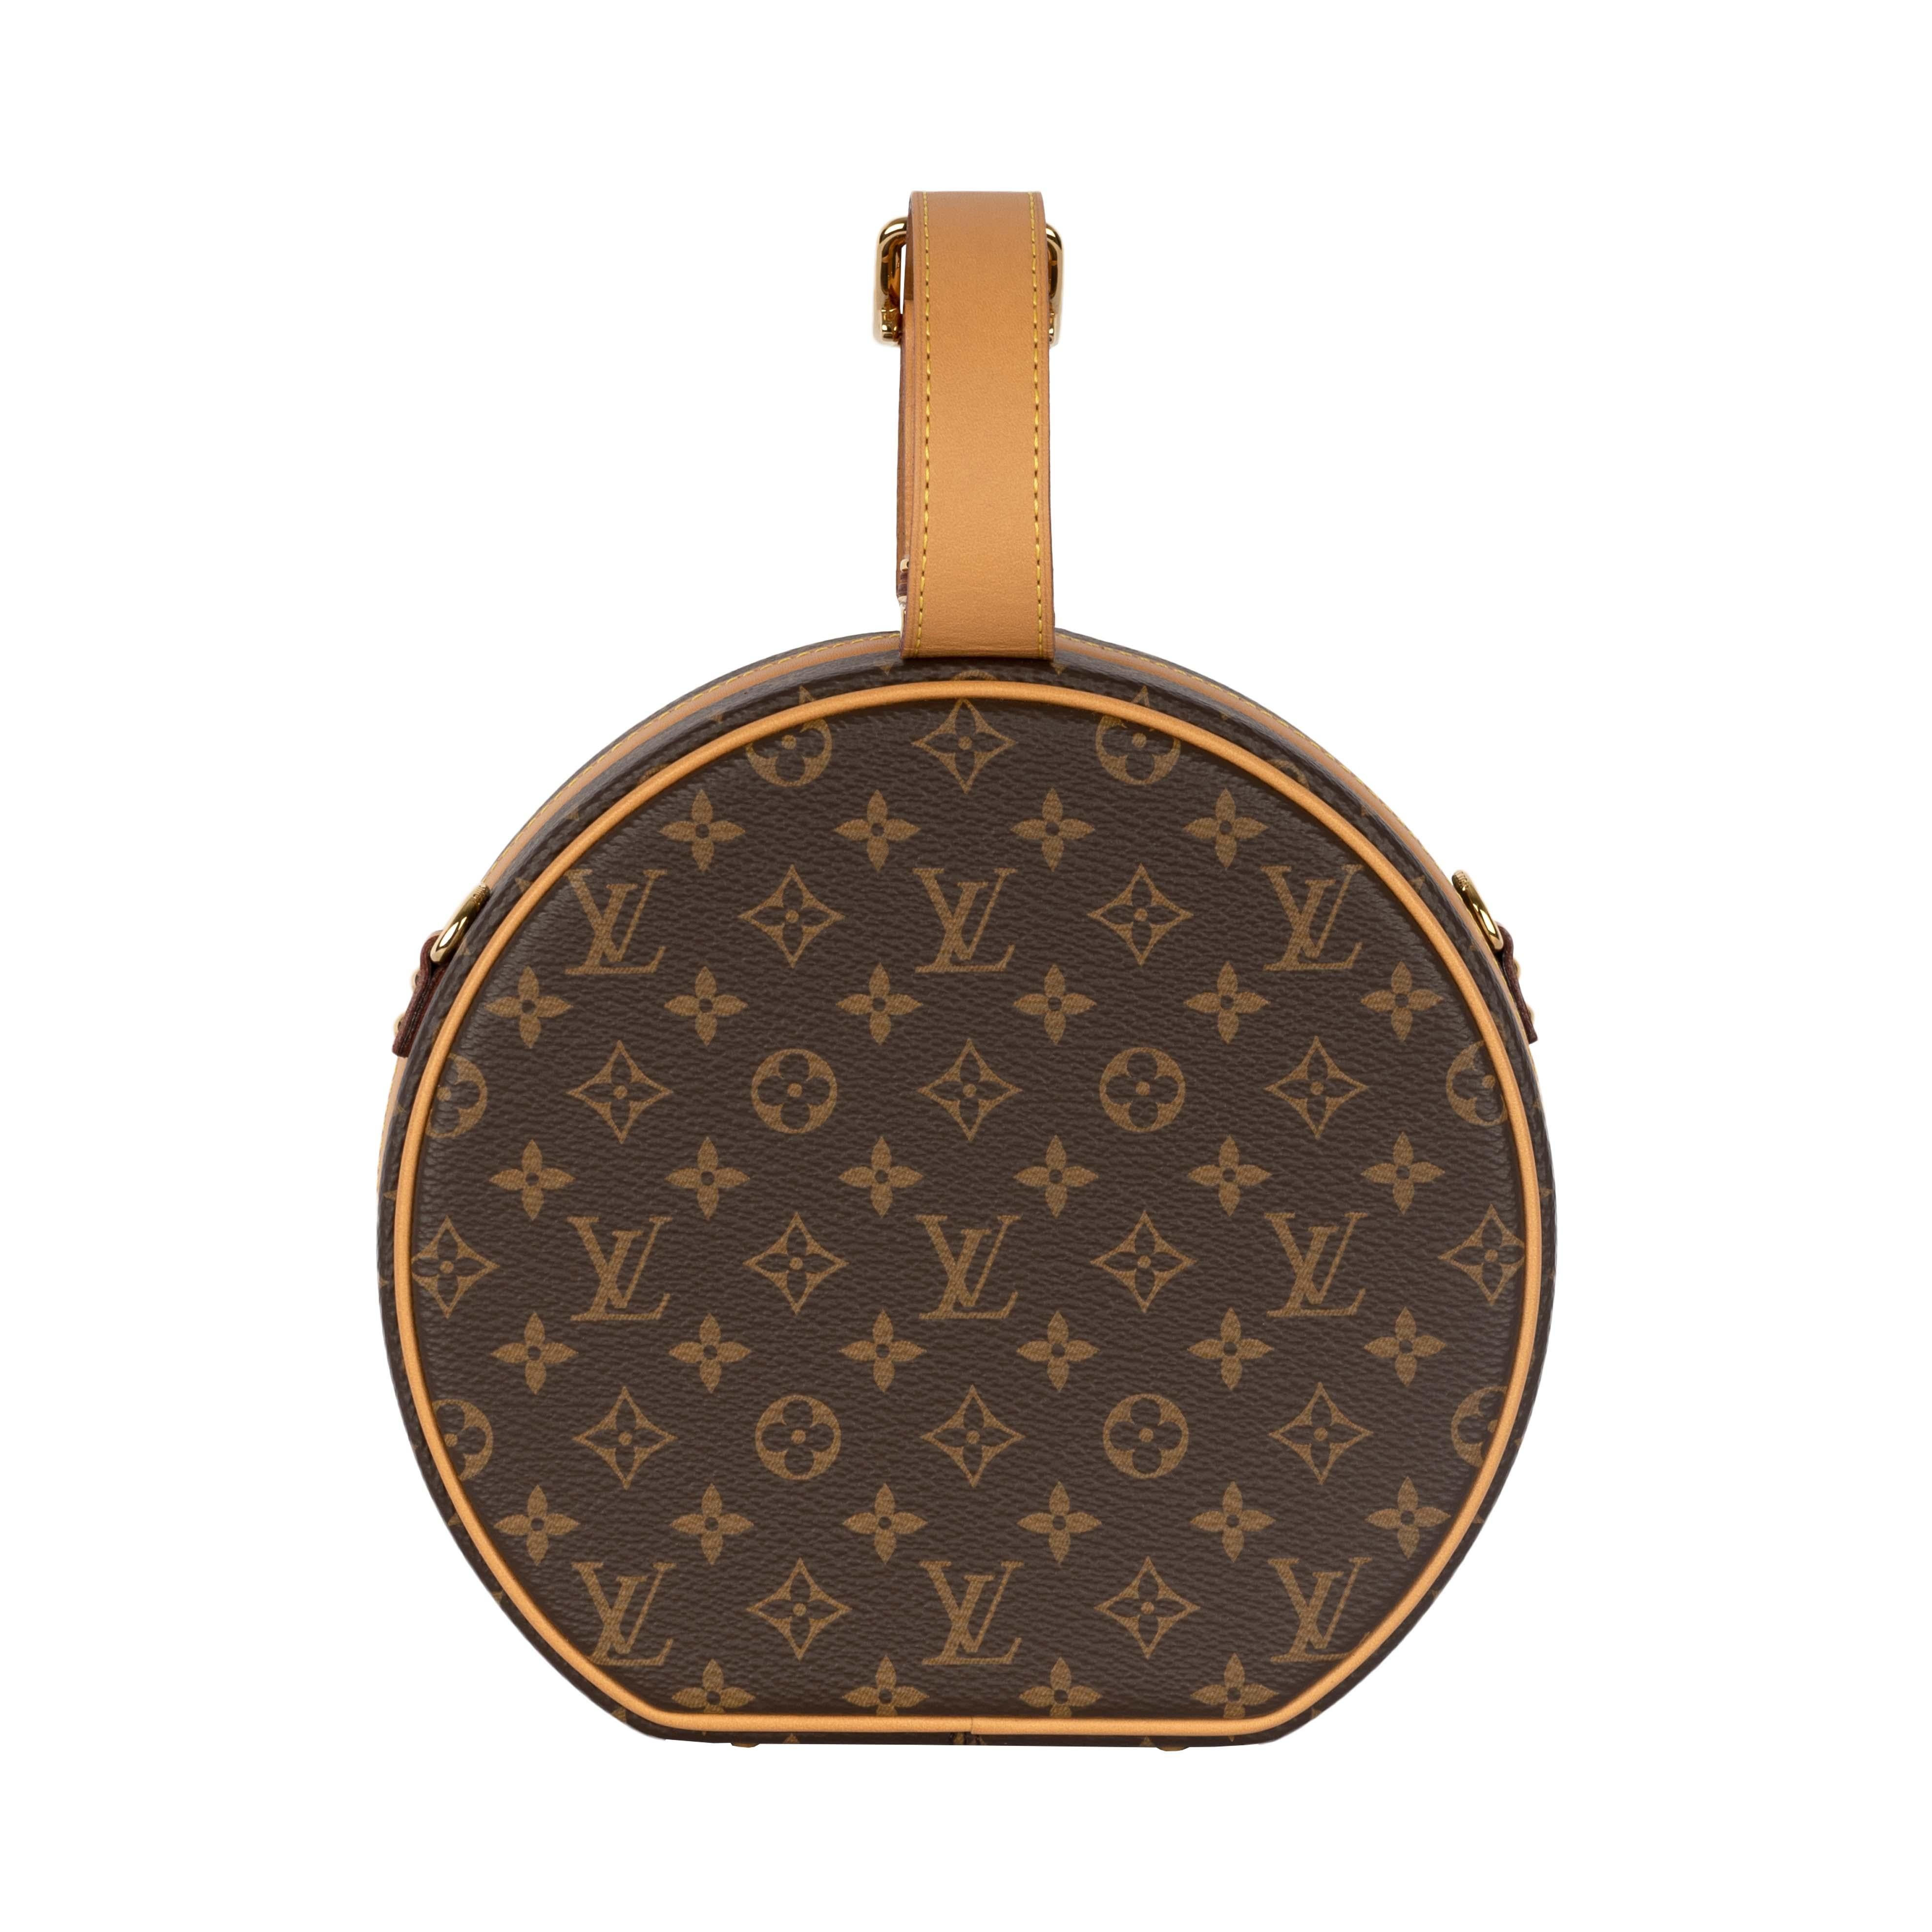 Inspired by the brand's travel history, the Louis Vuitton Petite Boite Chapeau features the brand monogram on its signature cowhide fabric. The shape resembles that of the Boite Chapeau and each metallic hardware is personalized with a unique brand